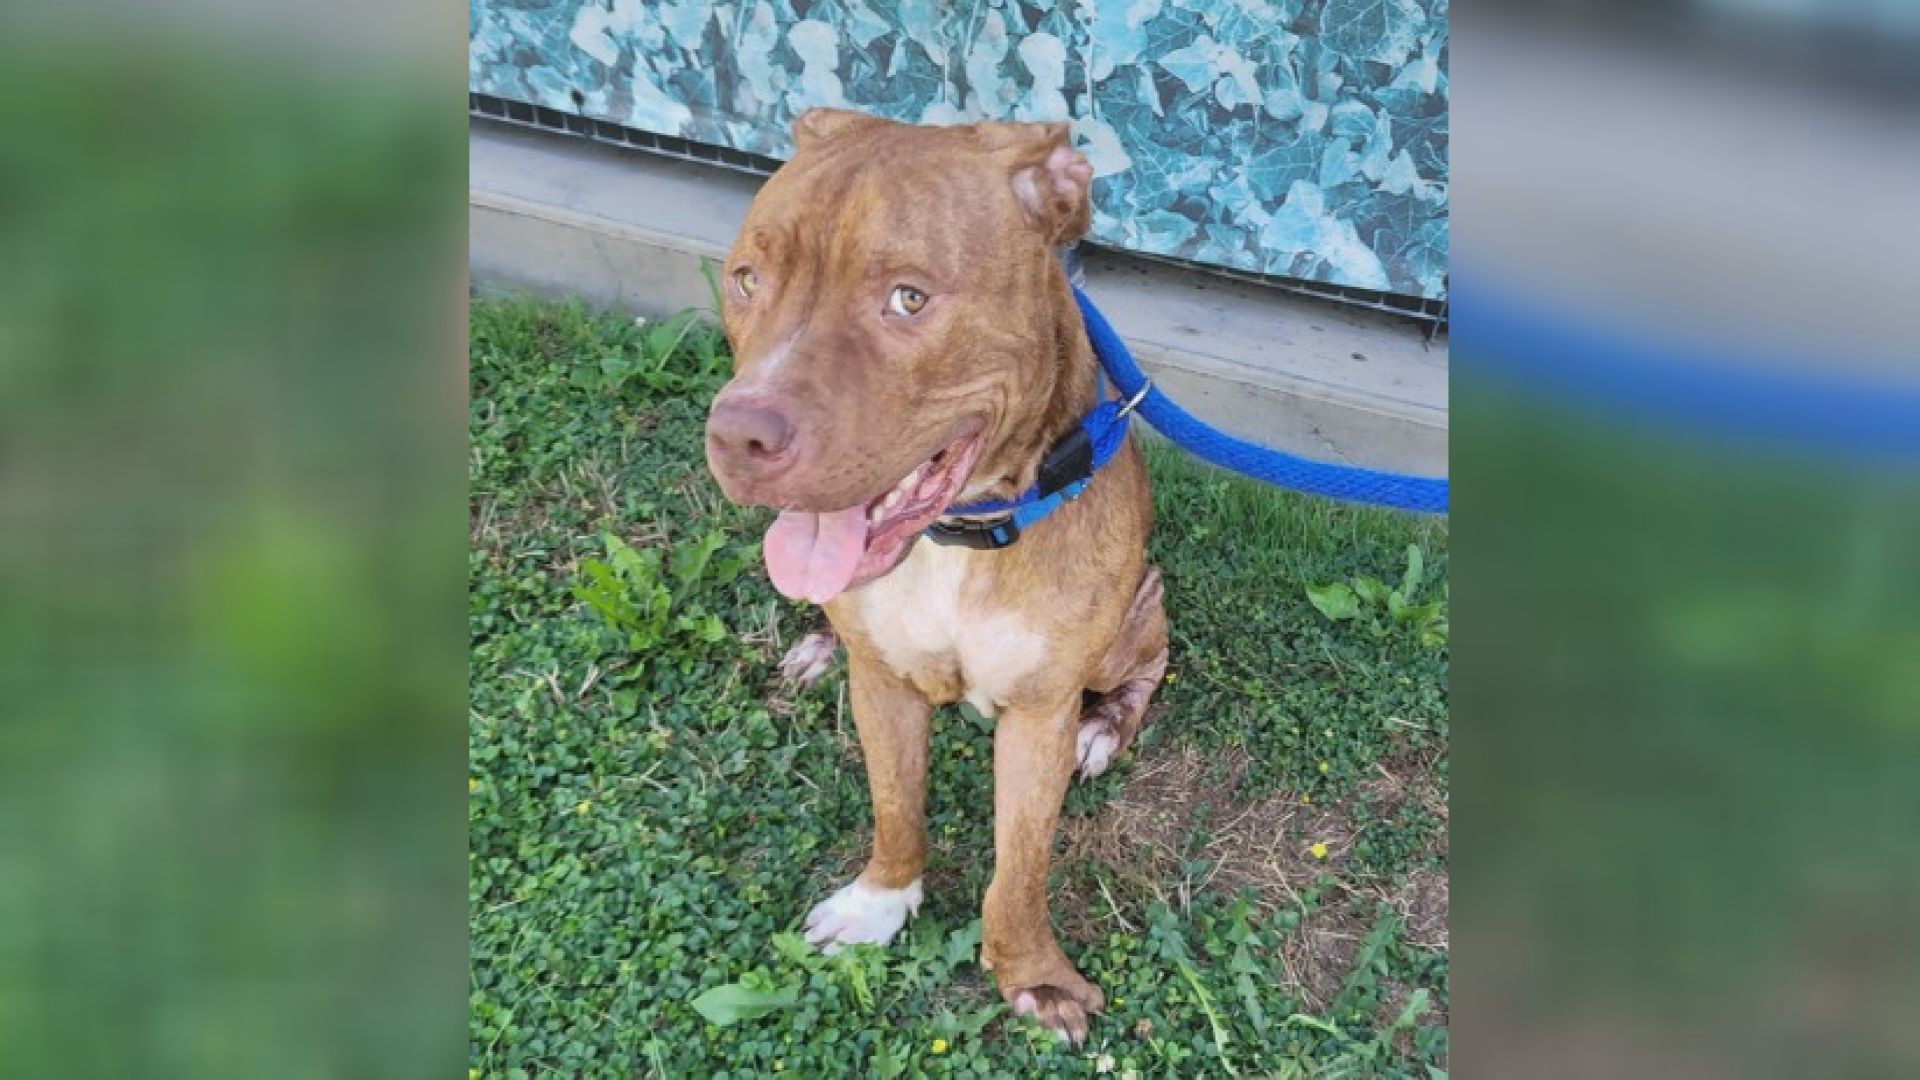 While Scoob can be shy at first, he has come out of his shell at the shelter and is a sweet and energetic boy! Scoob would be a great dog for an active family.